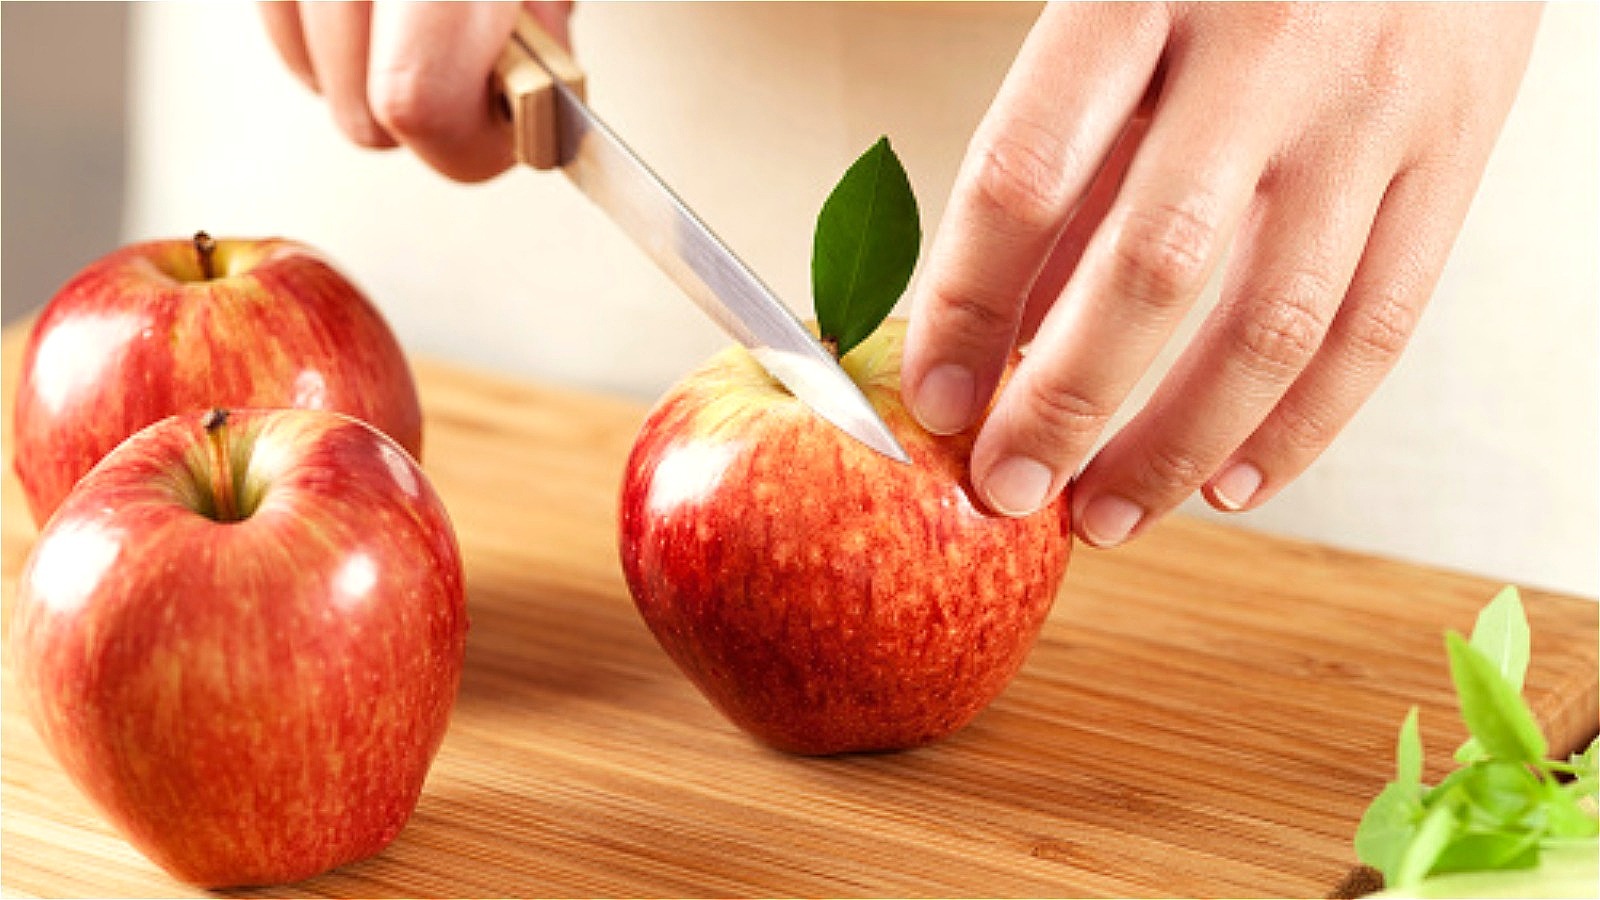 https://www.thedailymeal.com/img/gallery/the-best-way-to-cut-an-apple-without-any-fancy-tools/l-intro-1682952732.jpg